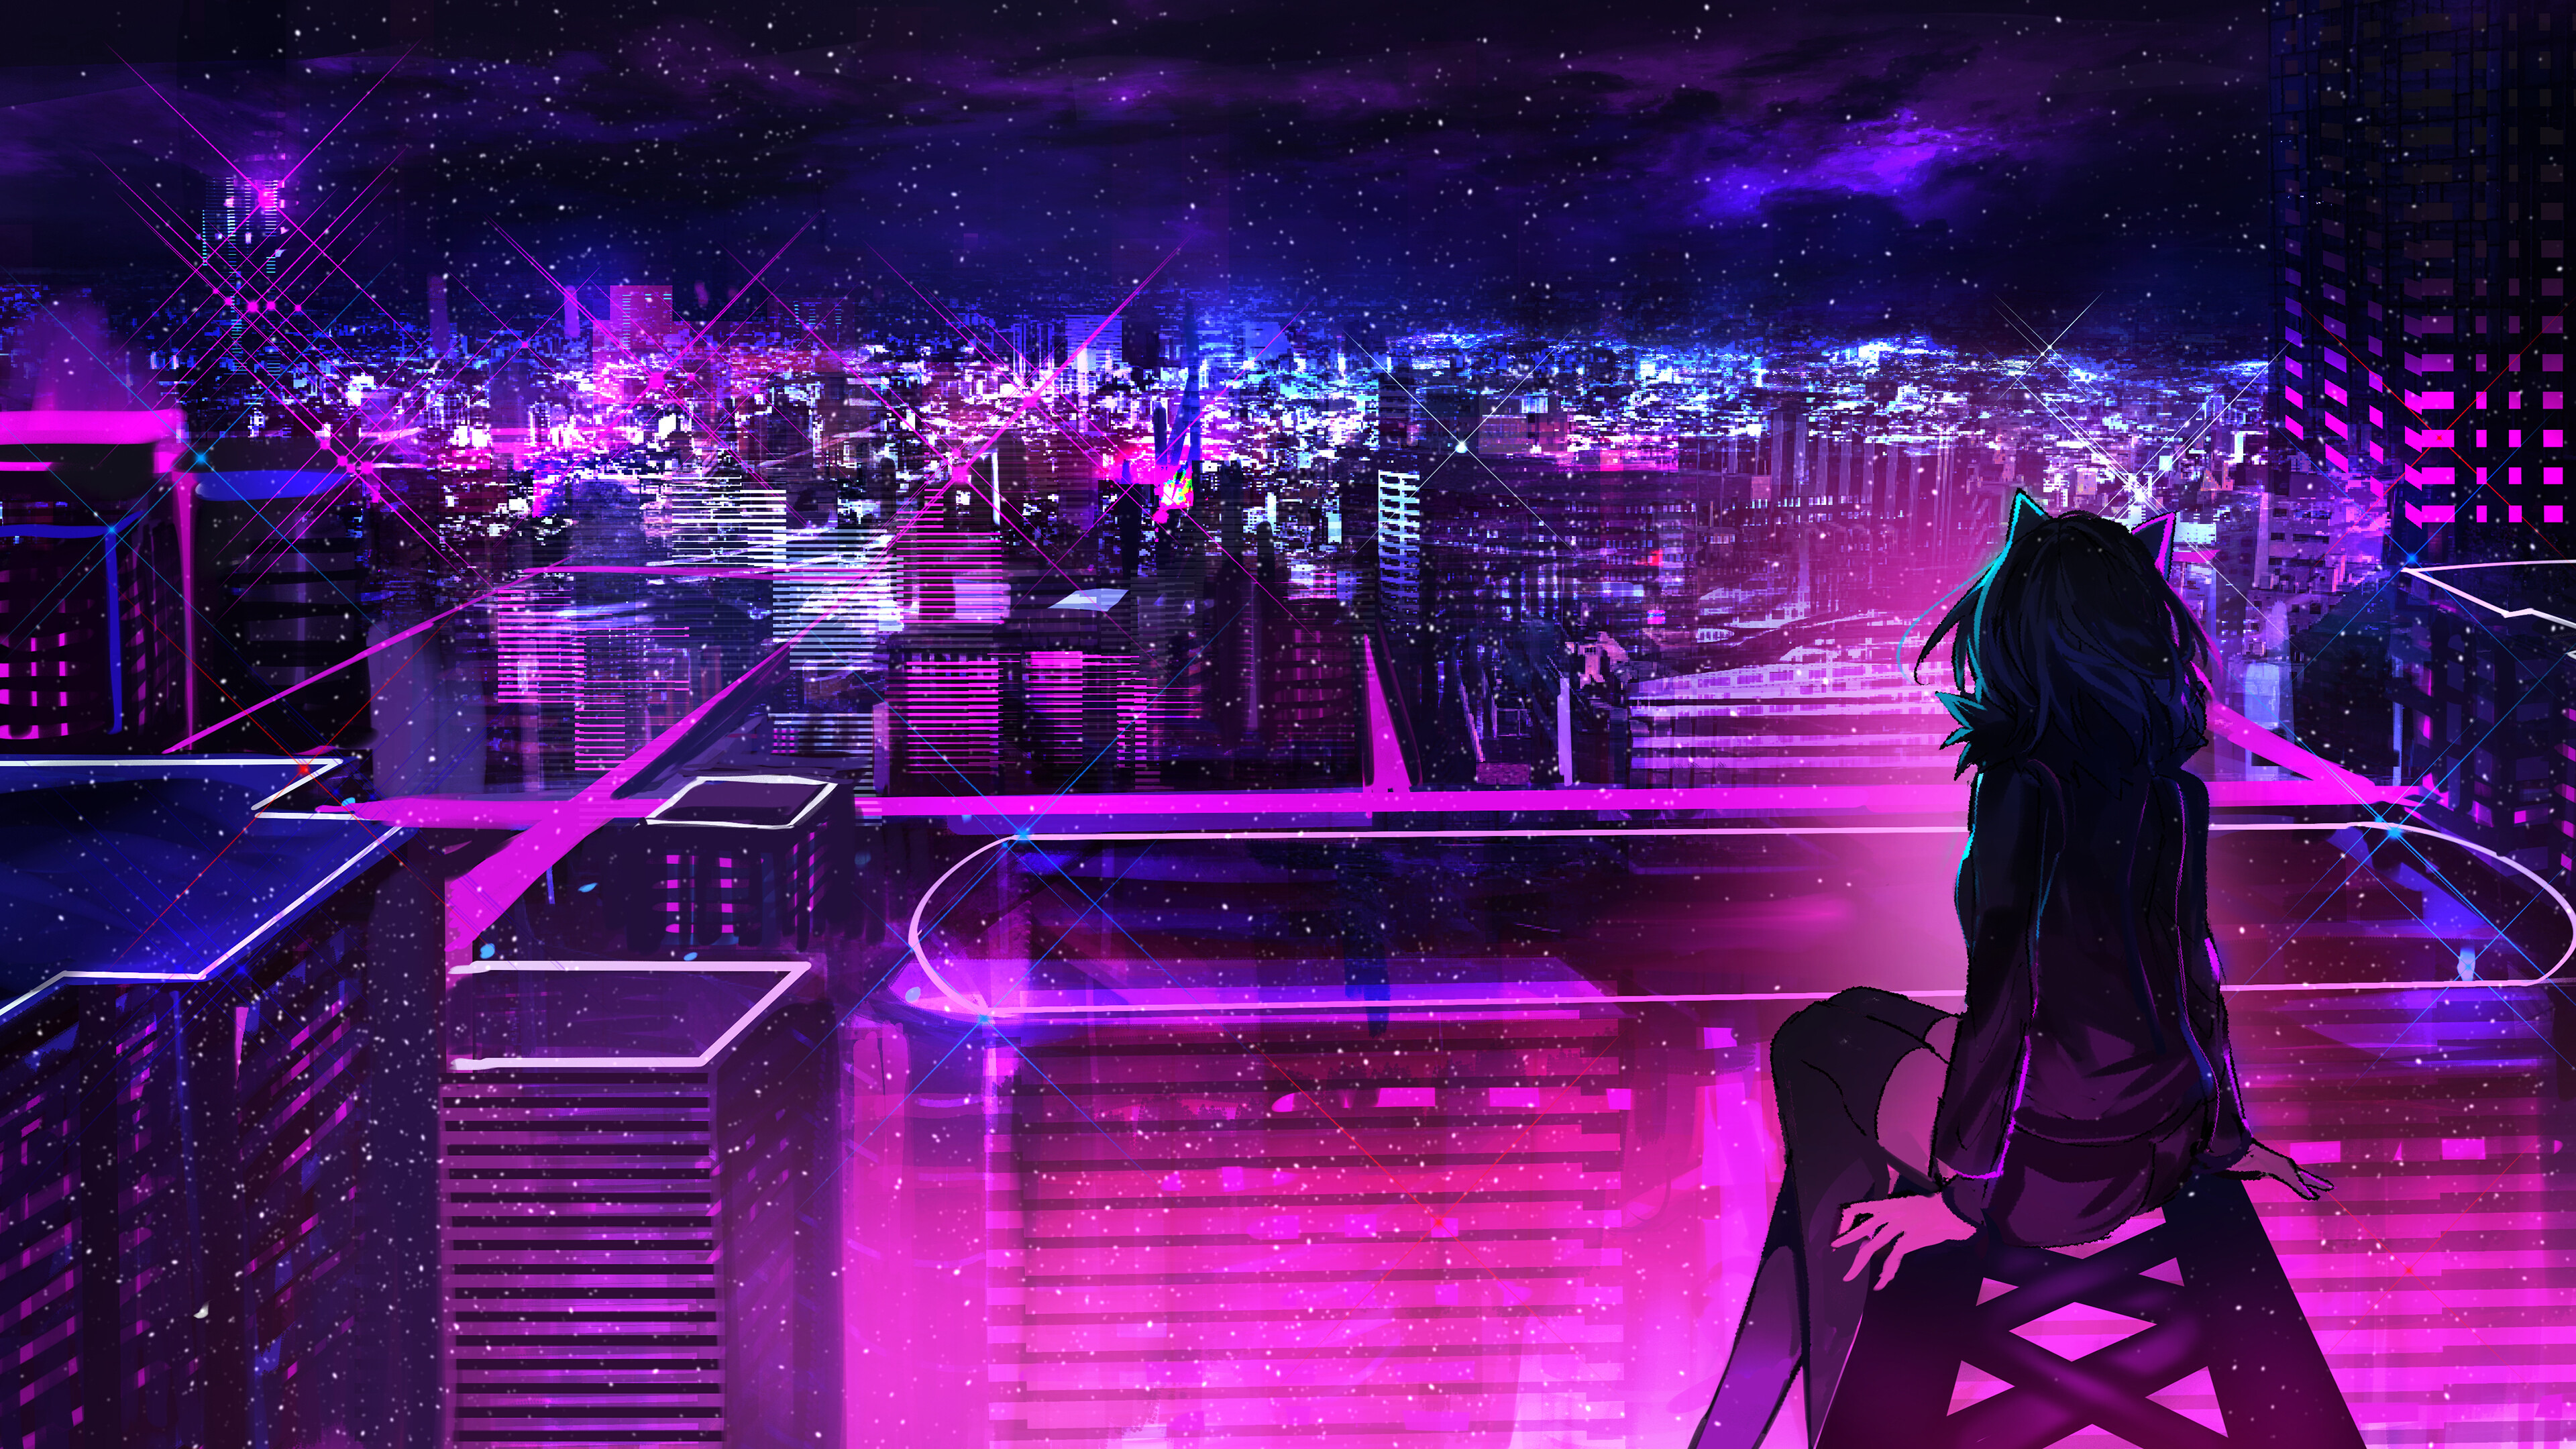 Free download Night City Anime Scenery Buildings 4K Wallpaper 62586 [1920x1080] for your Desktop, Mobile & Tablet. Explore Anime Building HD 4k Wallpaper. Building Wallpaper HD, 4K Anime Wallpaper, Anime Wallpaper 4K